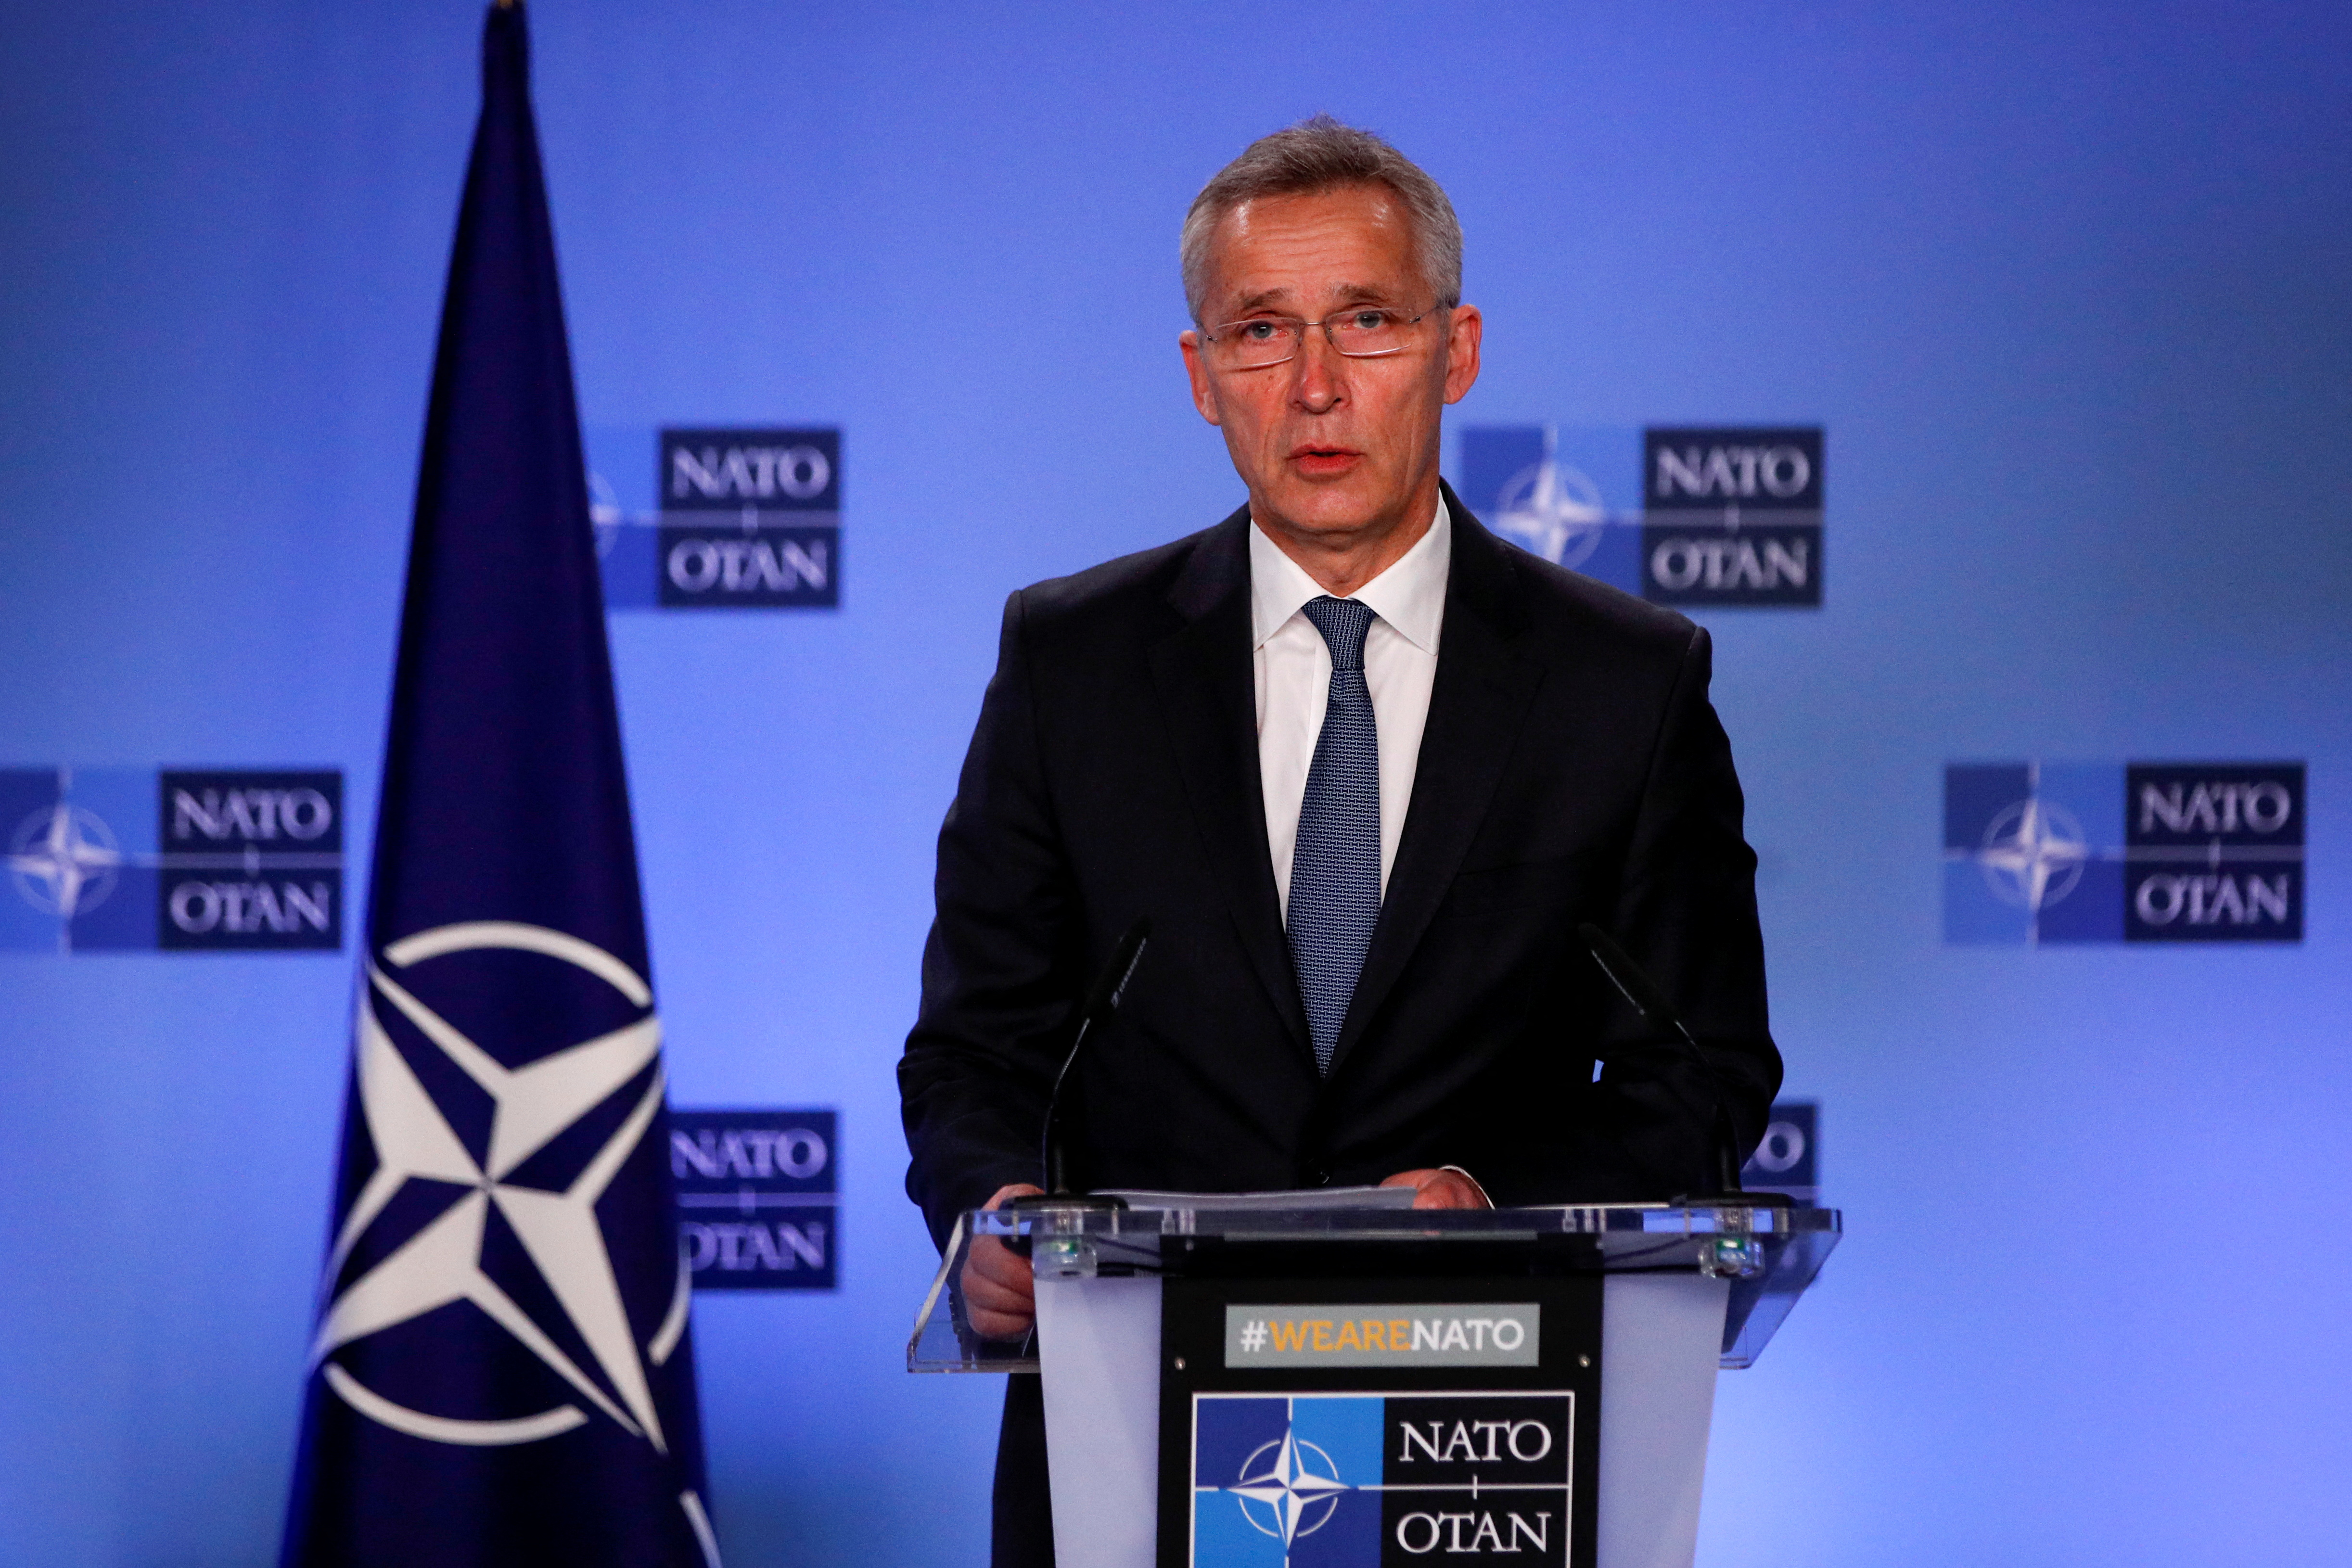 NATO Secretary General Jens Stoltenberg attends a joint news conference with North Macedonian Prime Minister Dimitar Kovacevski in Brussels, Belgium February 3, 2022. REUTERS/Johanna Geron